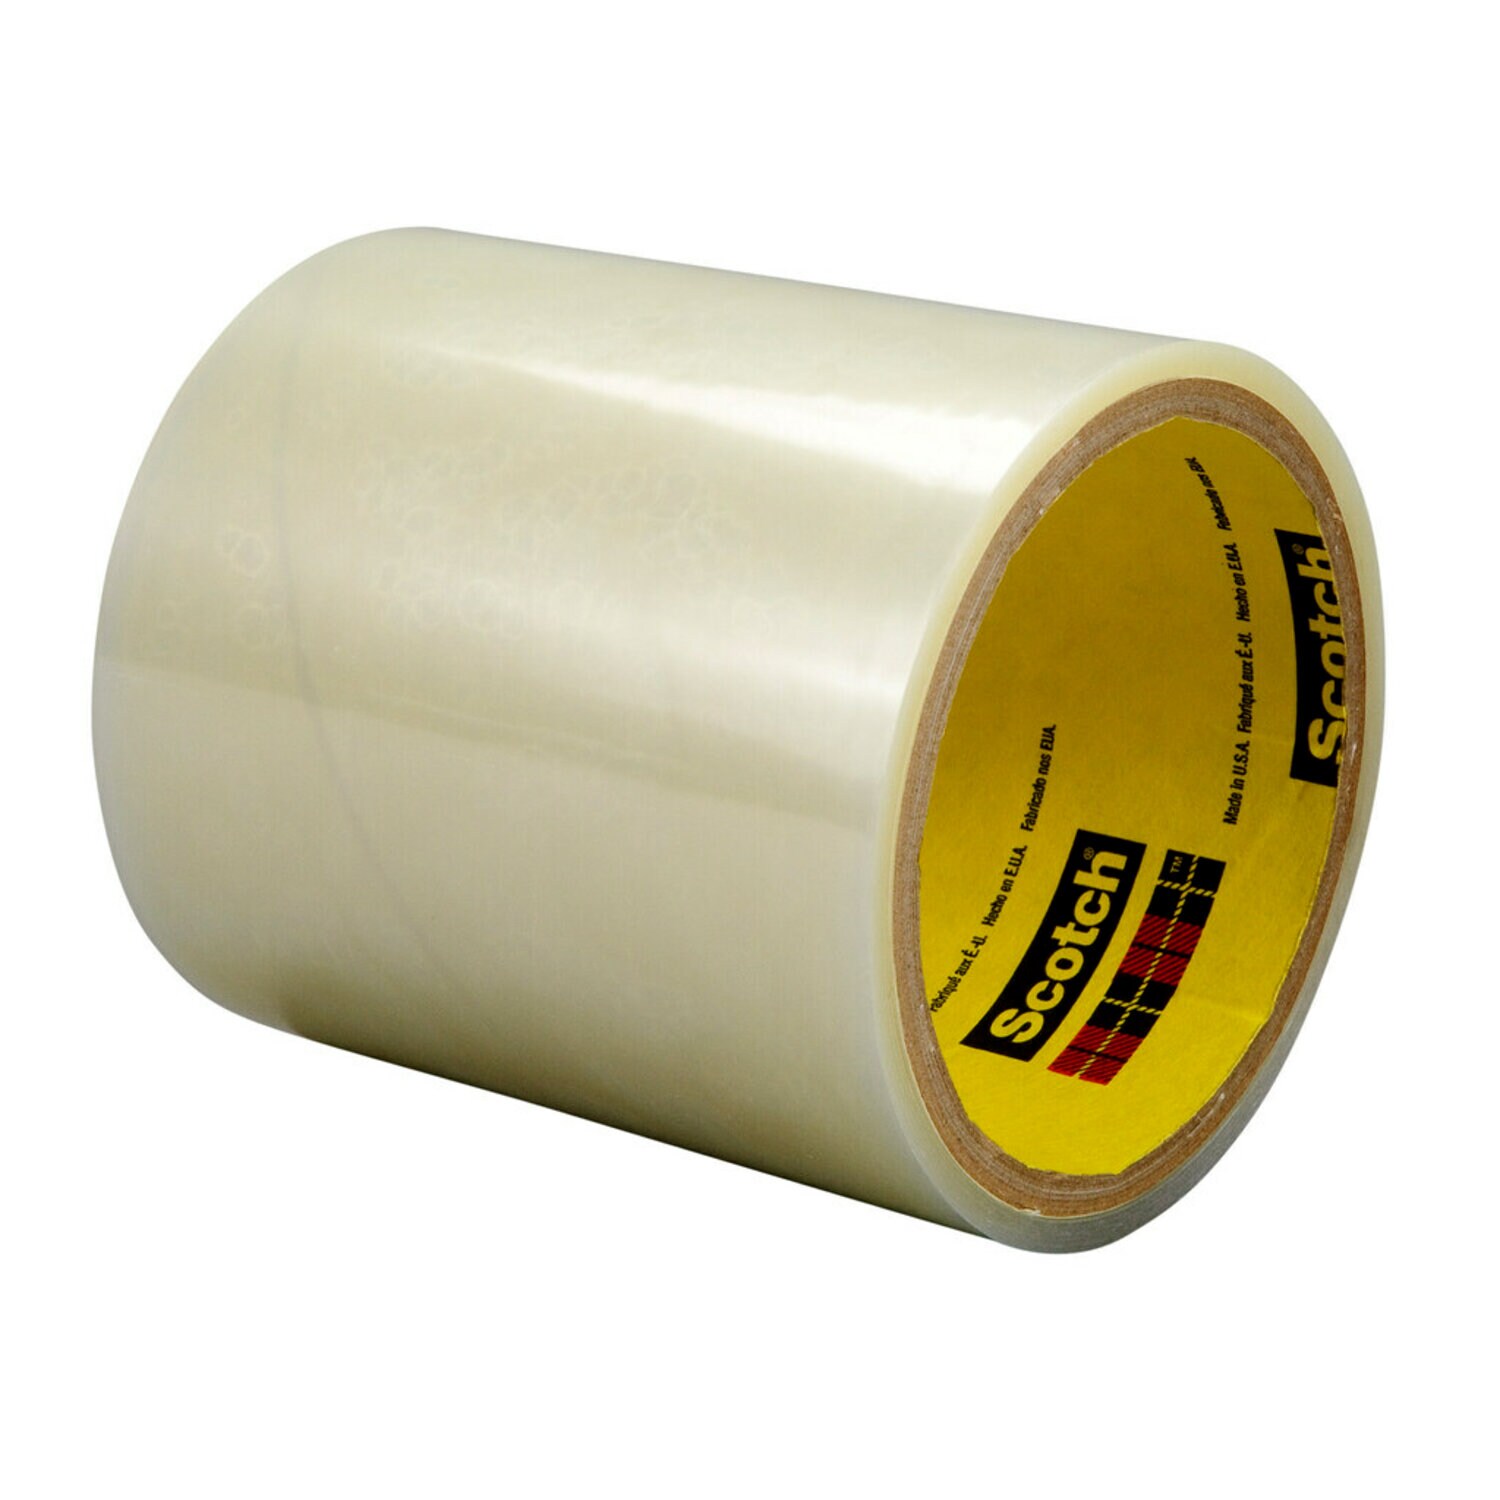 7000001485 - 3M Double Coated Tape 9628FL, Clear, 54 in x 60 yd, 2 mil, 1 roll per
case